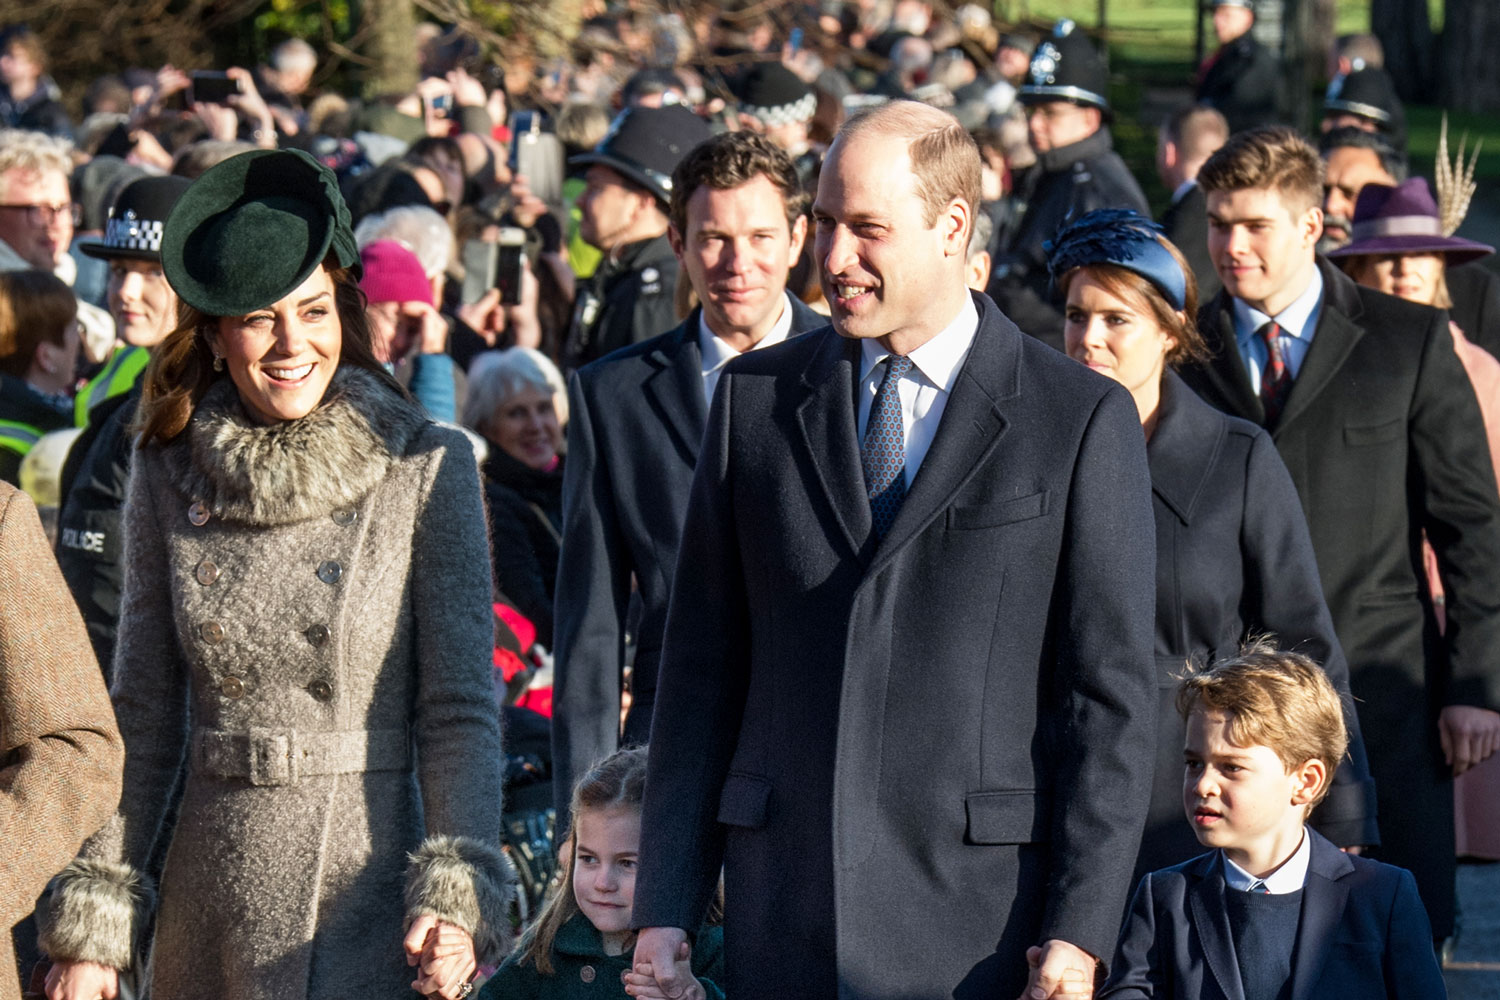 William And Kate Are Expected To Make A ‘Big Announcement’ Over The Holidays